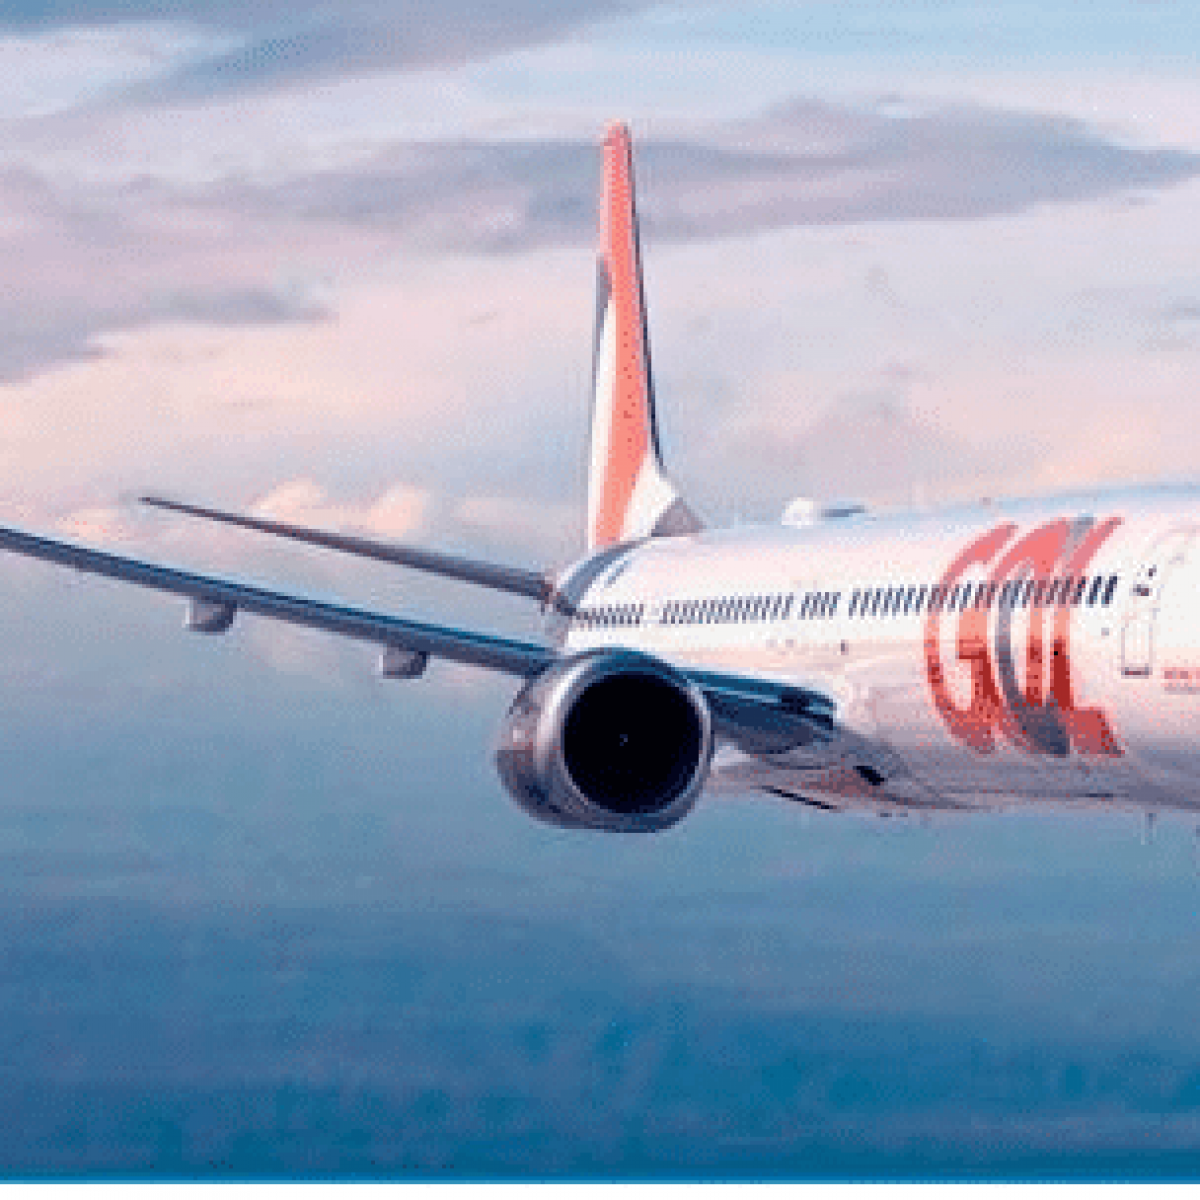 Gol To Open New Routes With New Longer Range Boeing 737 Max